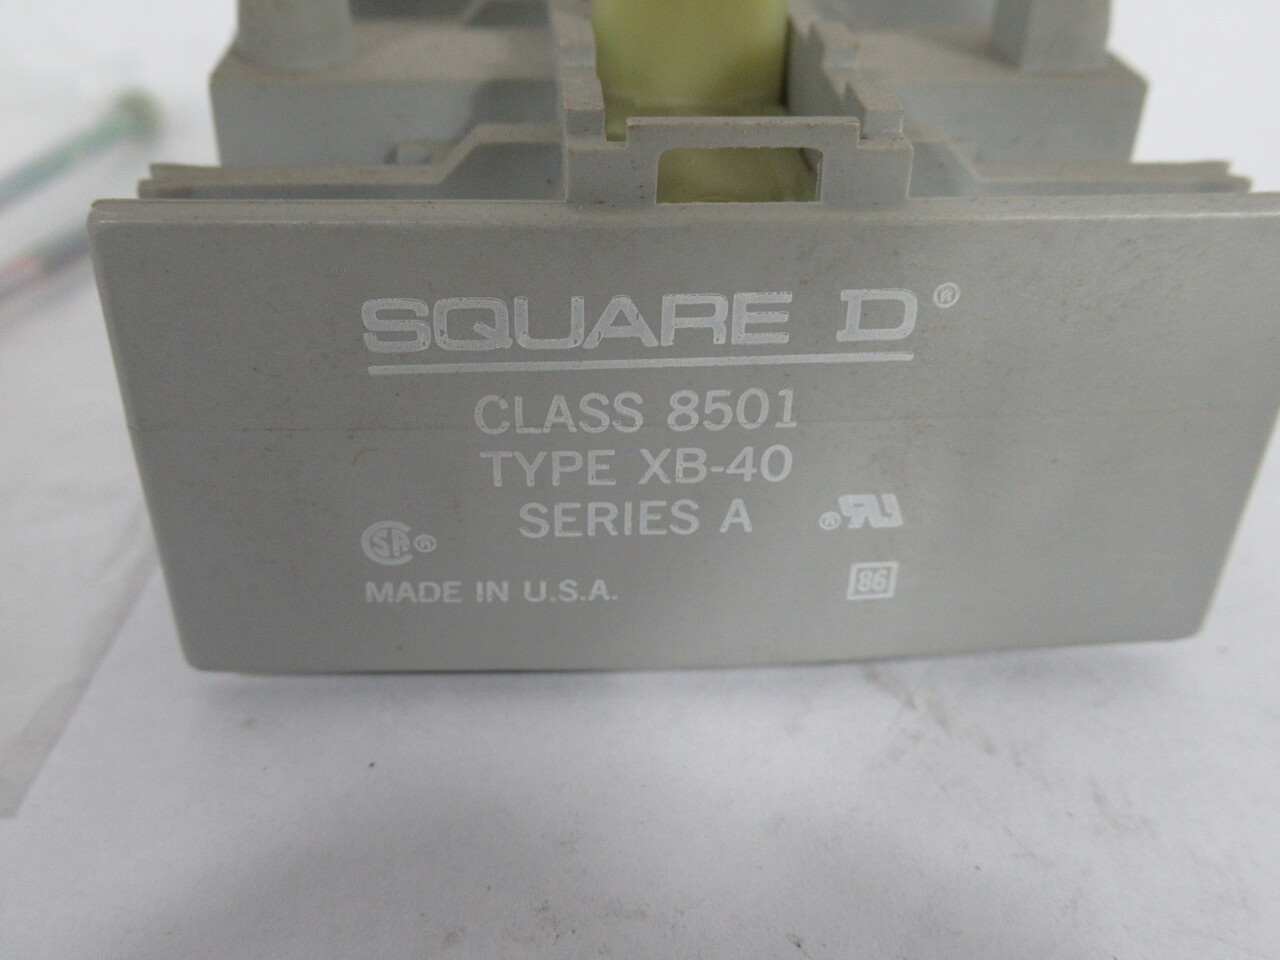 Square D 8501-XB40 Series A Universal Adder Deck 4NO *No Label on Box* NEW